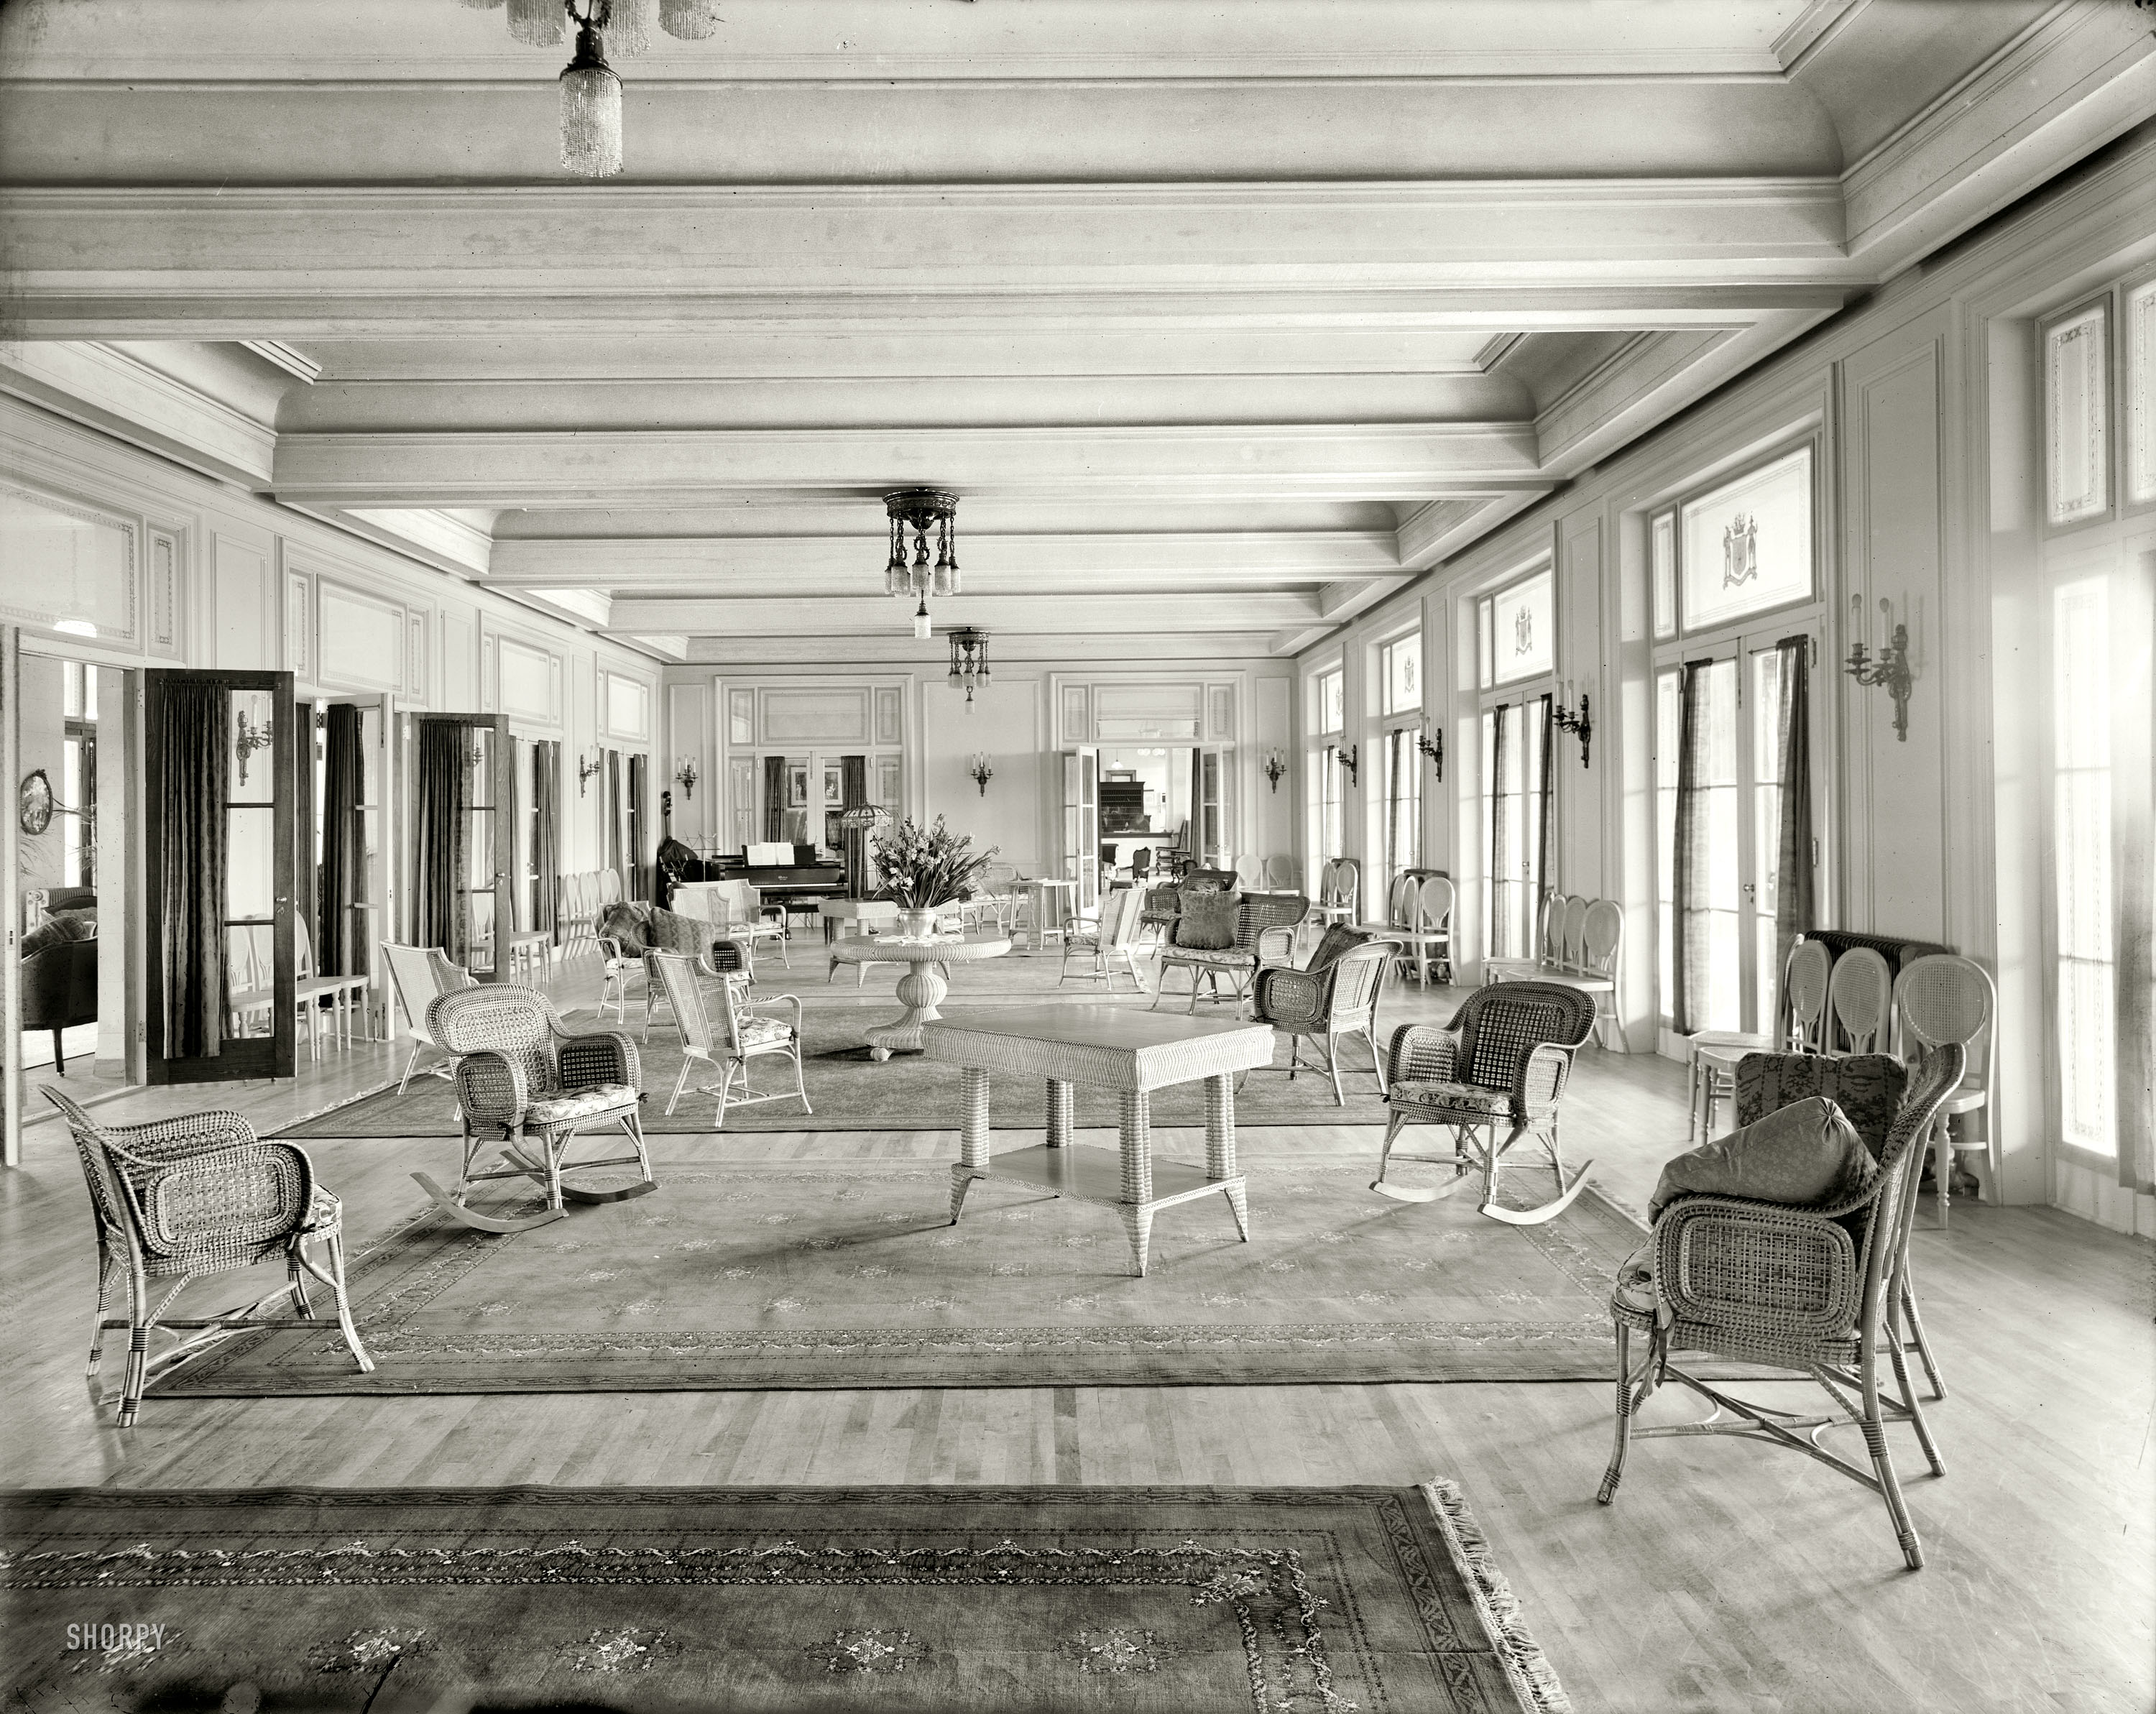 Bluff Point, New York, circa 1910. "Hotel Champlain, ladies' parlor." Continuing our tour of upstate New York resorts. 8x10 glass negative. View full size.